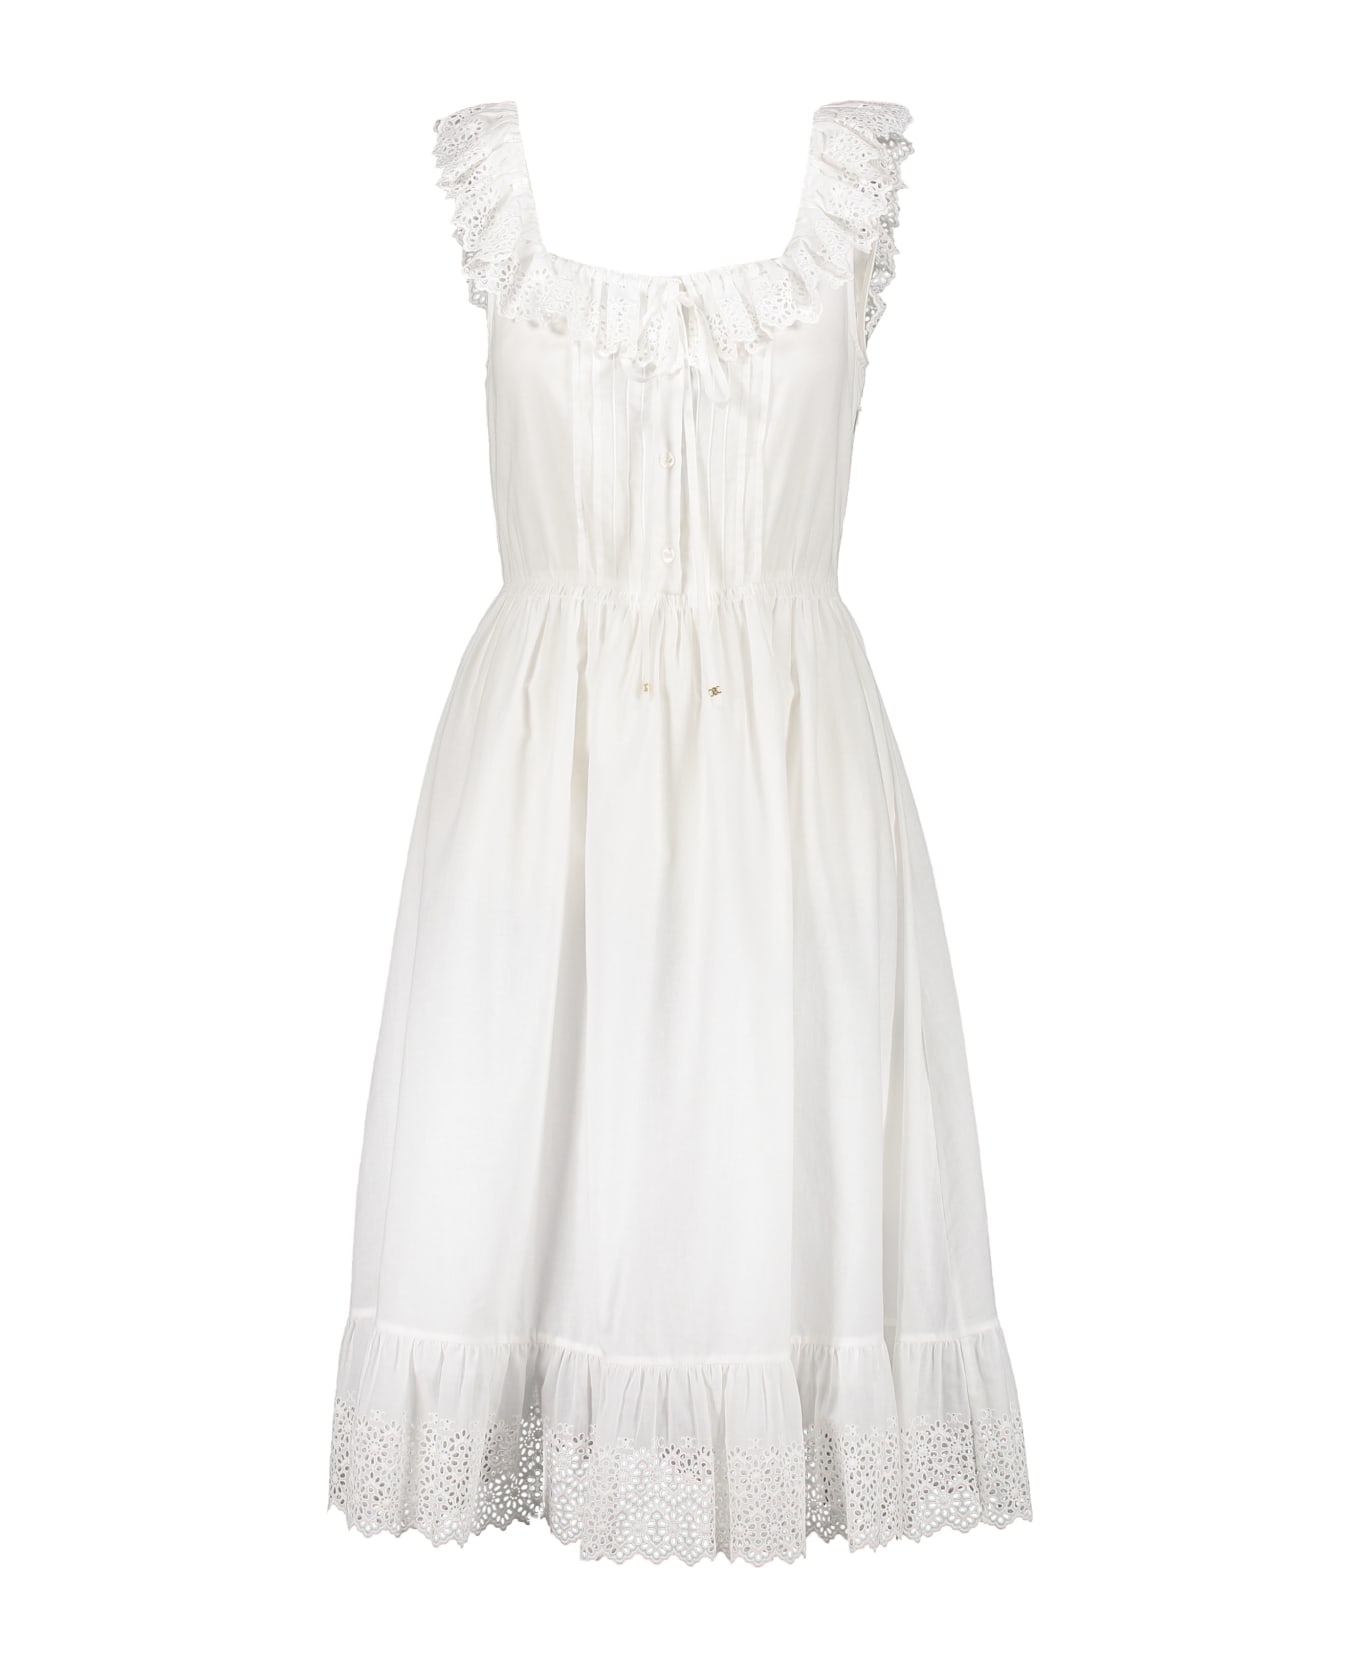 Celine Floral Embroidered Cotton Dress - White ワンピース＆ドレス